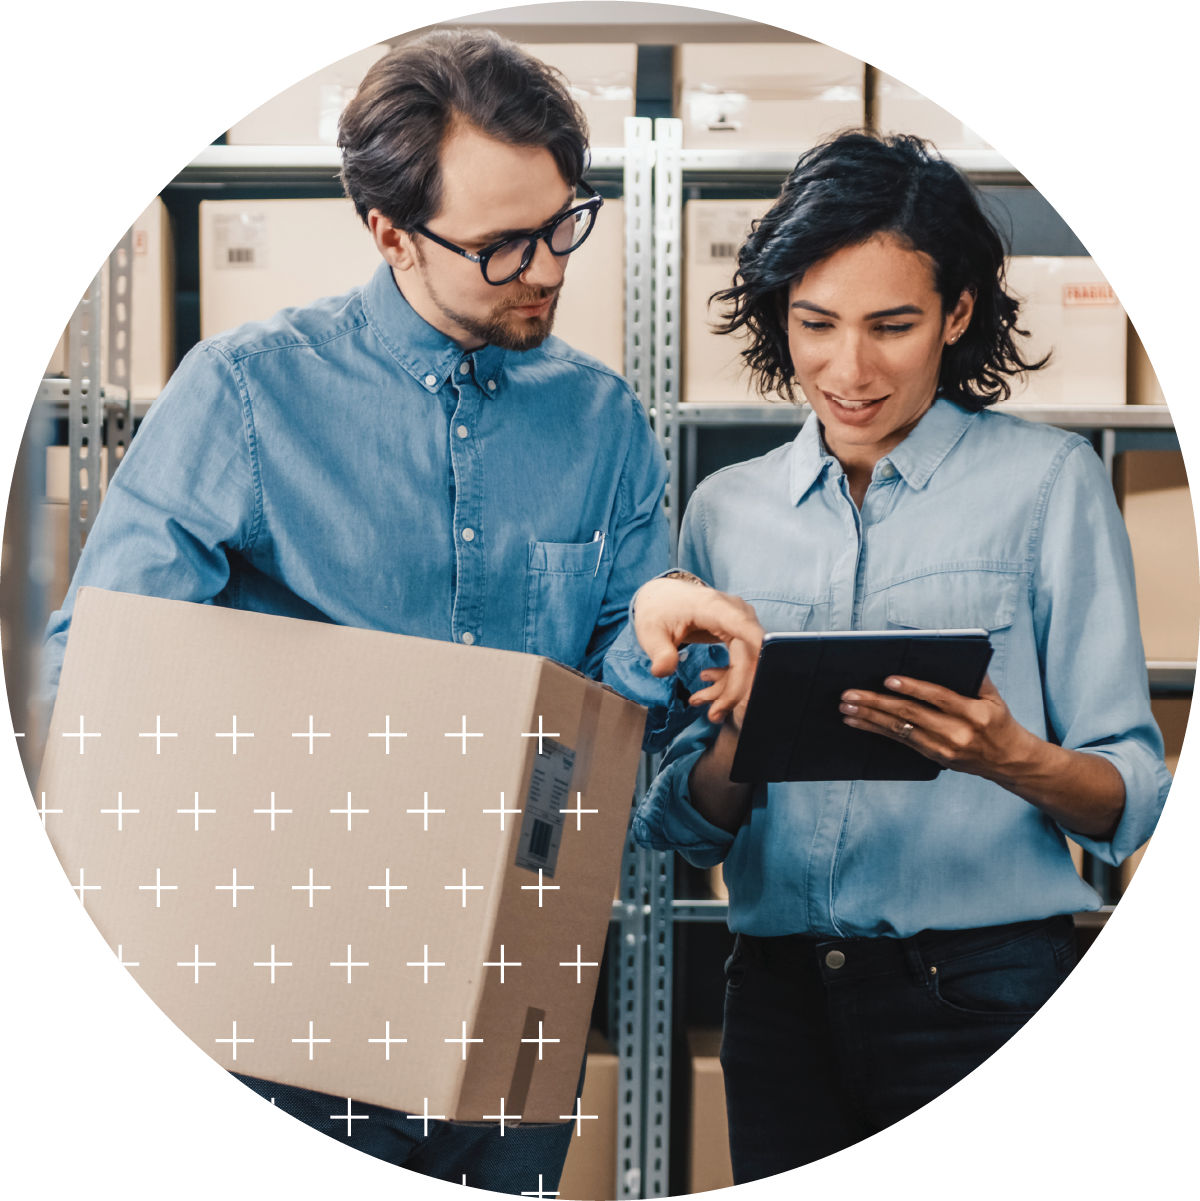 Small business owners in warehouse holding box and tablet